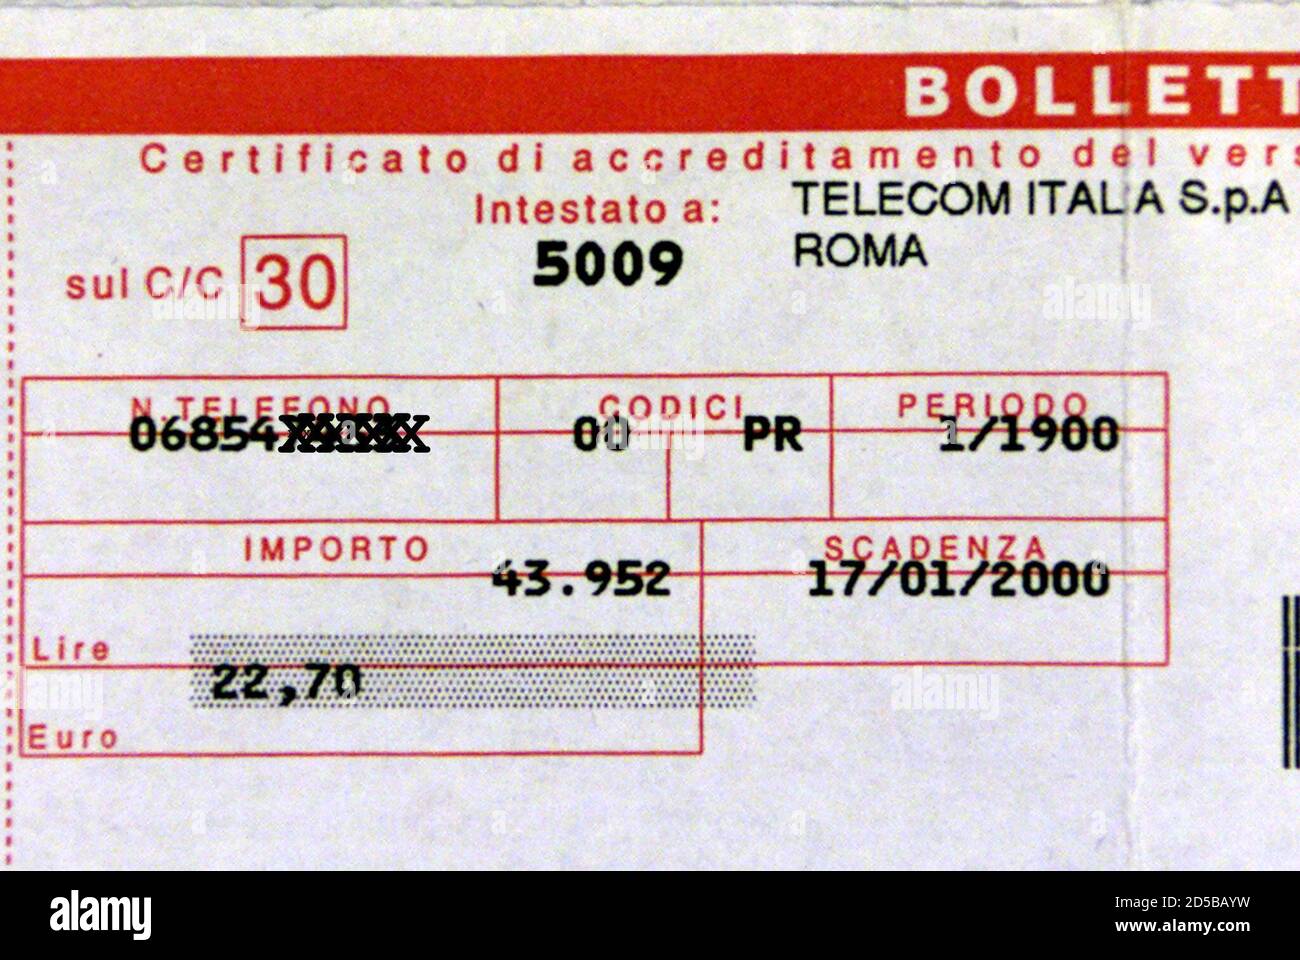 Detail of a bill from Telecom Italia, pictured December 28, wrongly  referring to the first two months of 1900 instead of 2000. Italy's biggest  telephone operator, which insists its computer software is